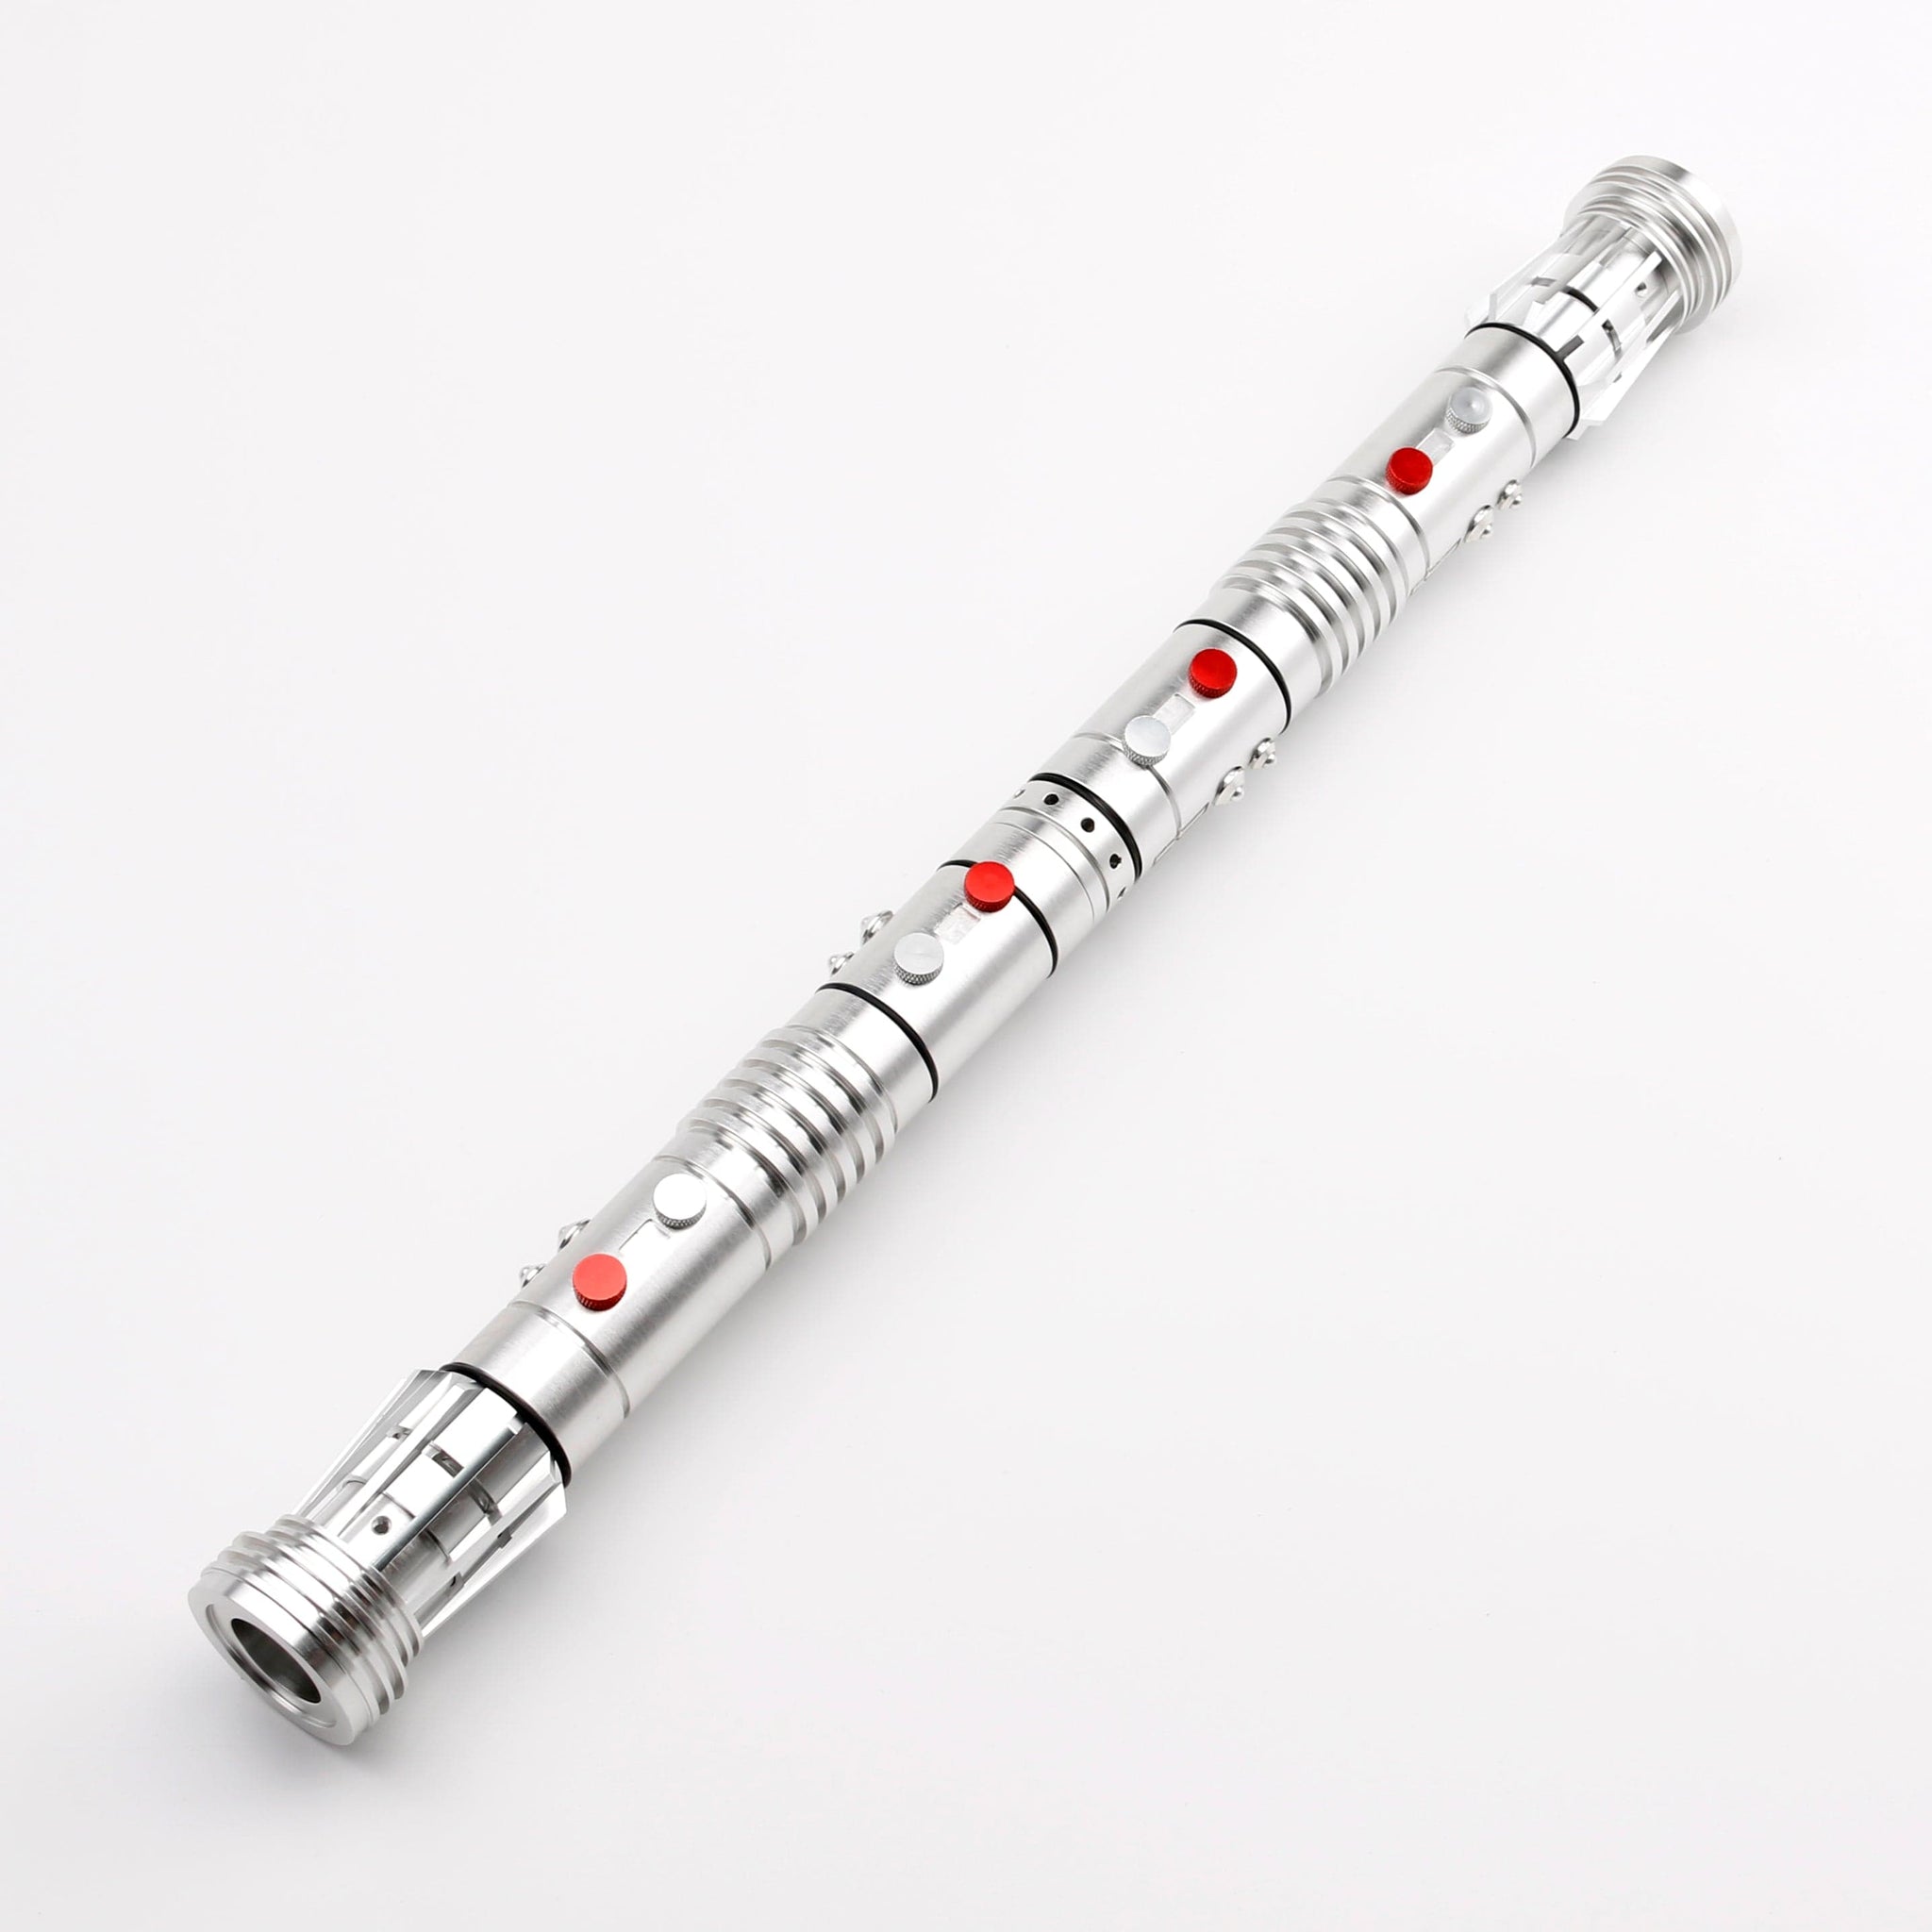 Maul Lightsaber - Star Wars Light include 2 - TheKedStore | Save 40% Today